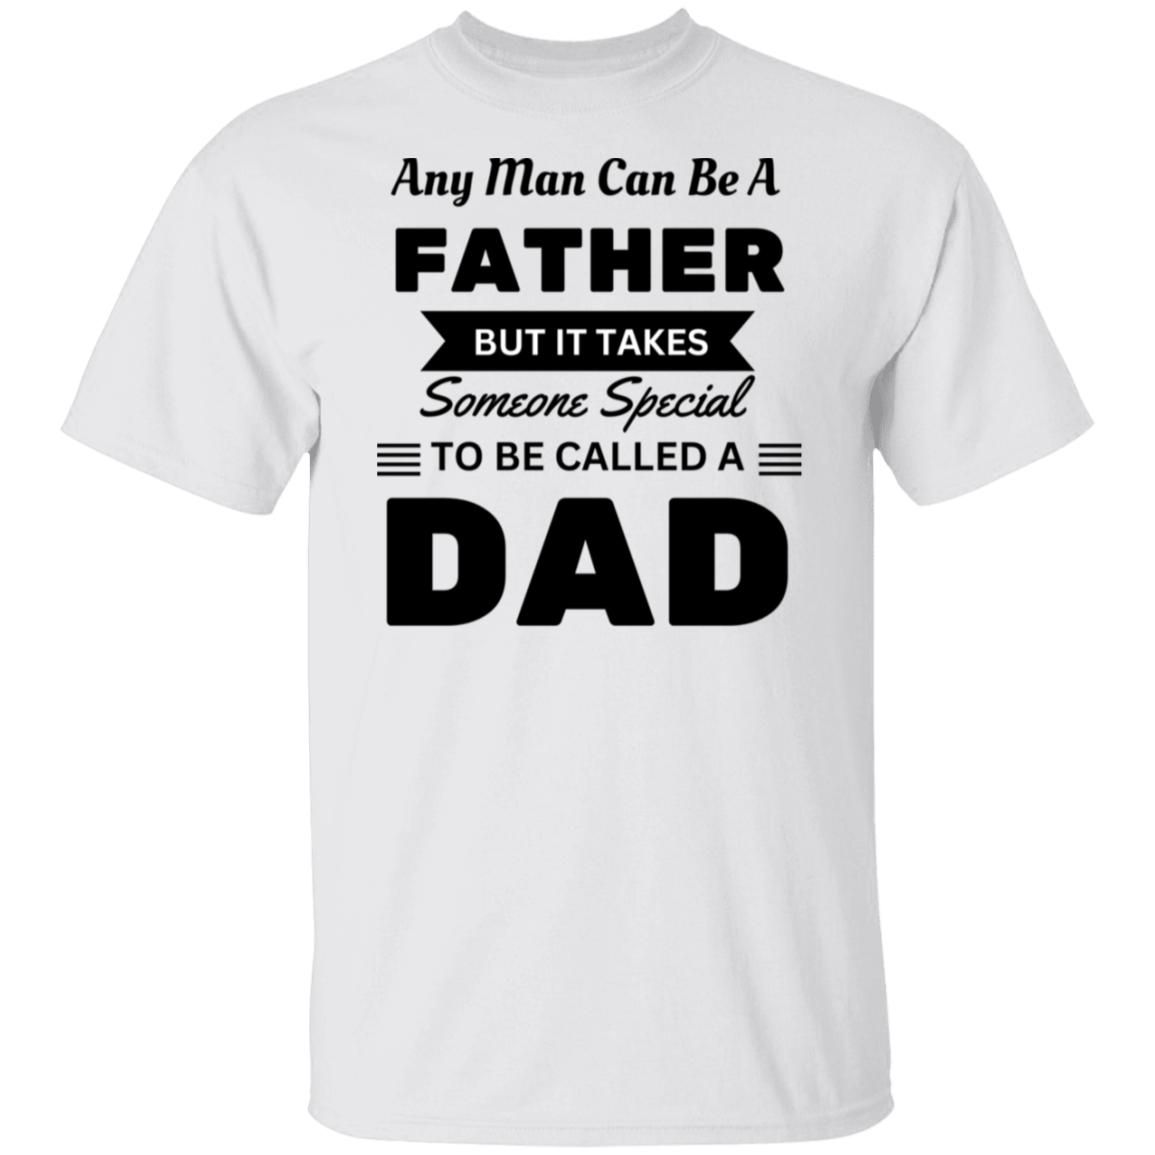 Any Man Can Be A Father  5.3 oz. T-Shirt